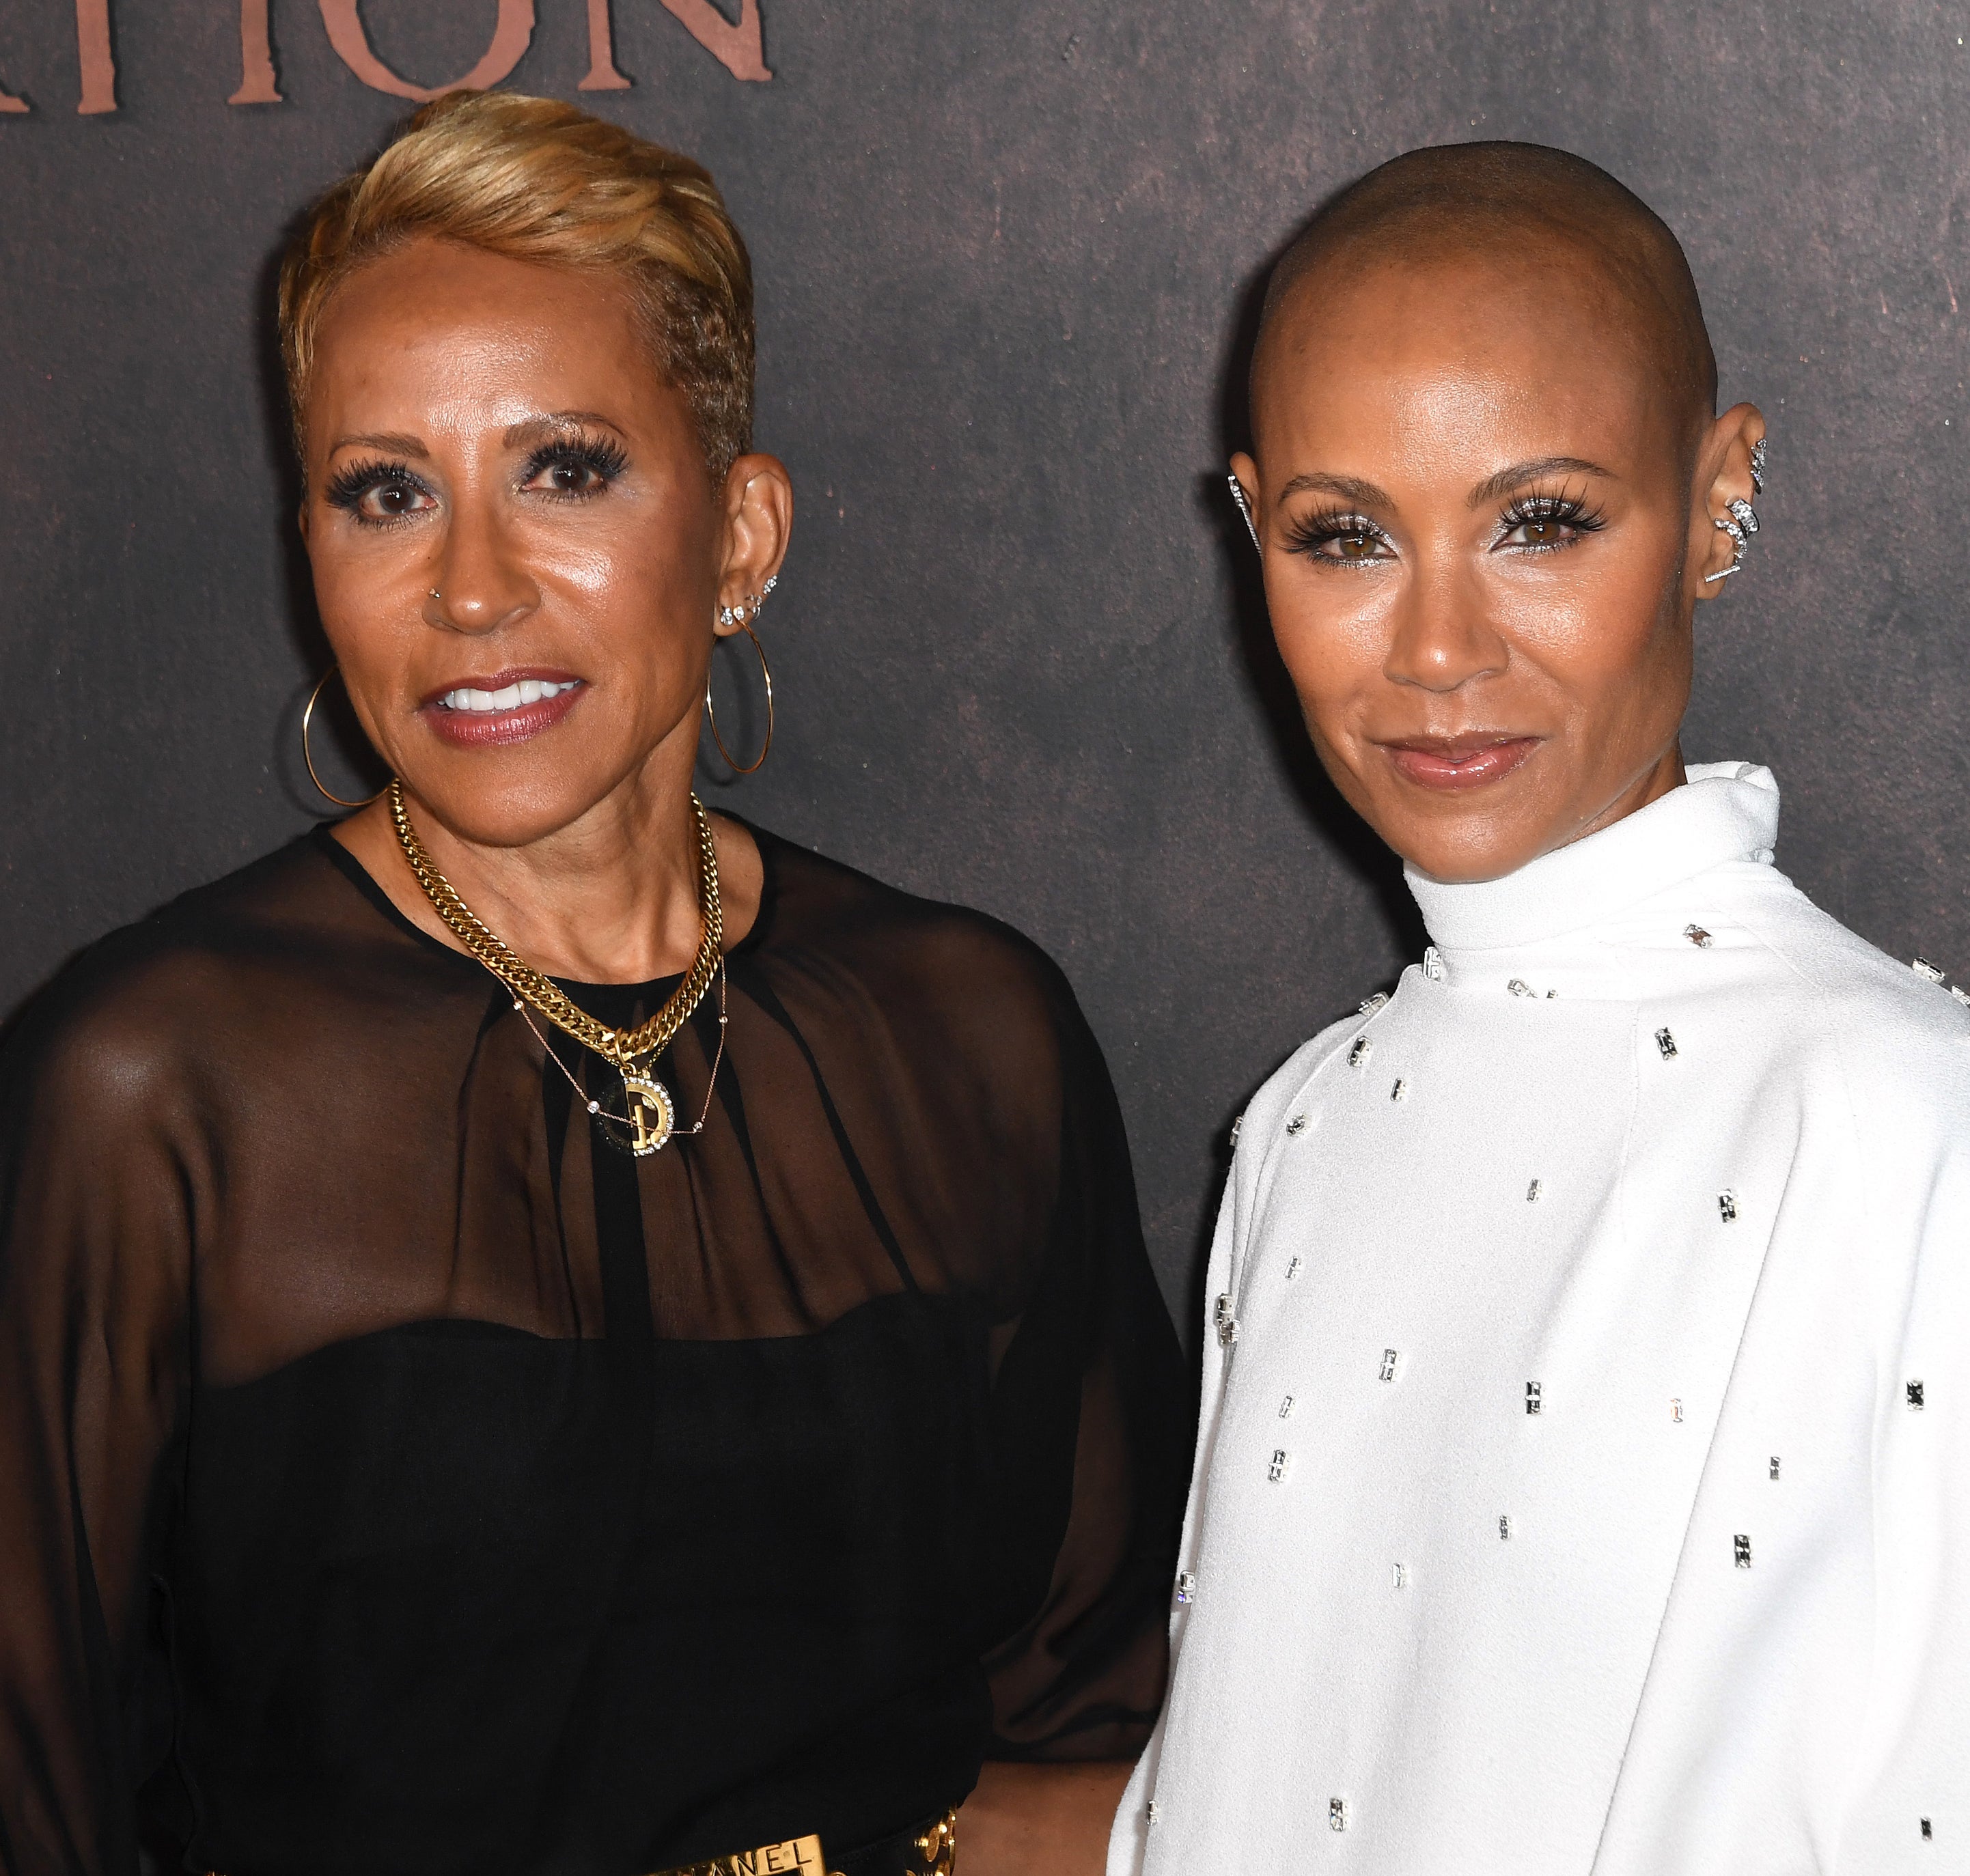 Close-up of Jada and Adrienne at a media event